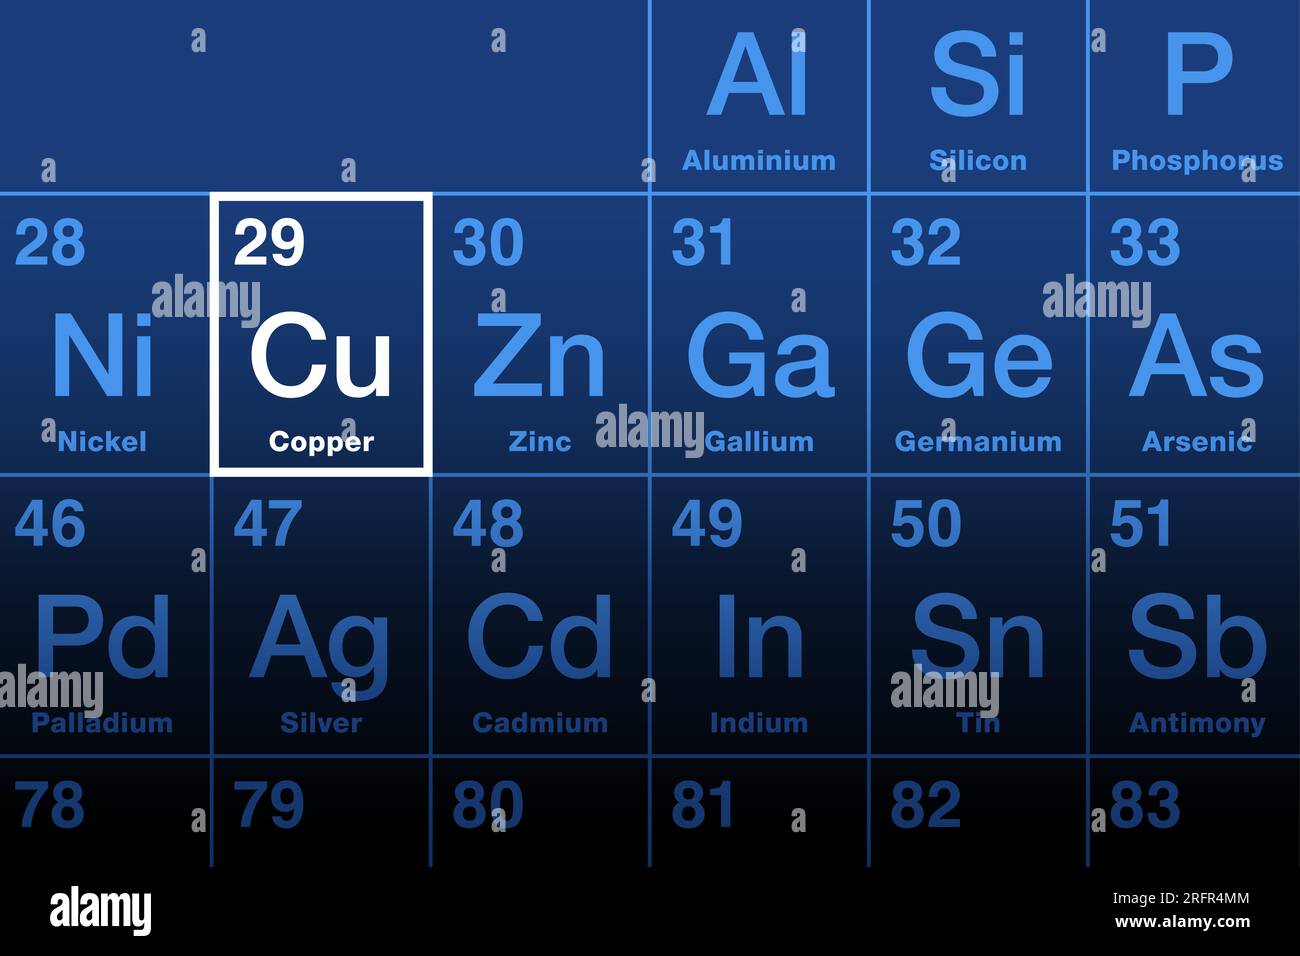 Copper element on the periodic table, with element symbol Cu from Latin cuprum, and with atomic number 29. Transition metal. Stock Photo